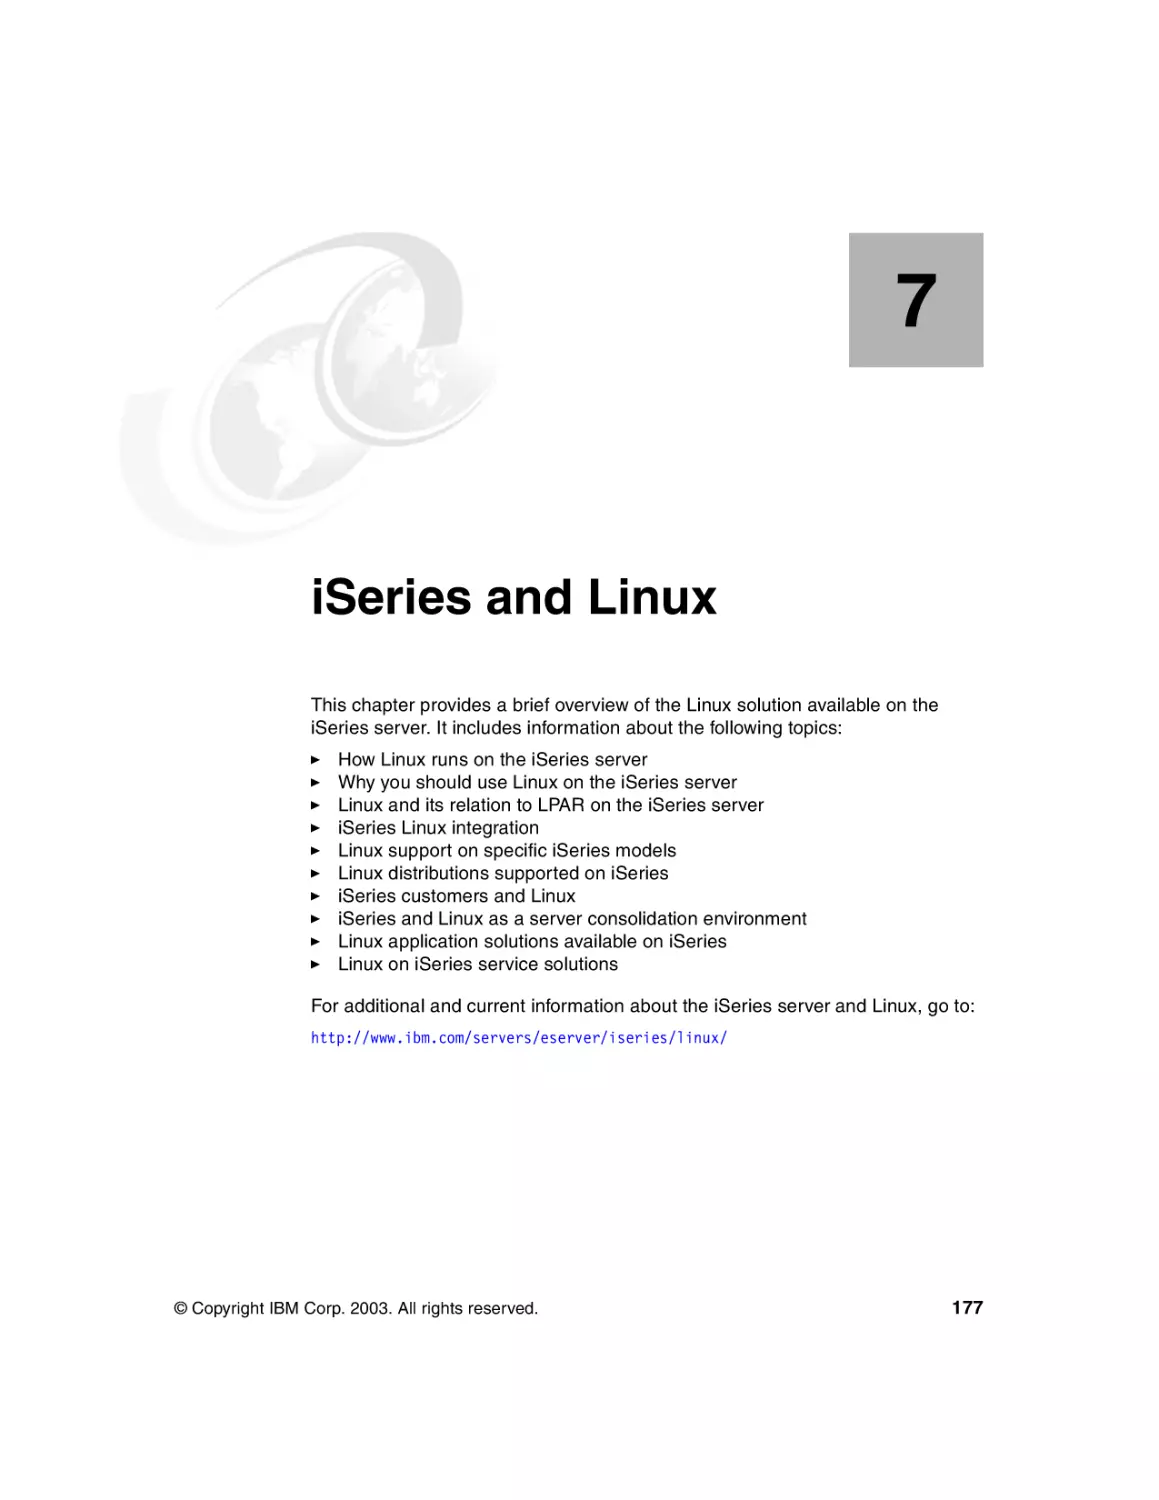 Chapter 7. iSeries and Linux